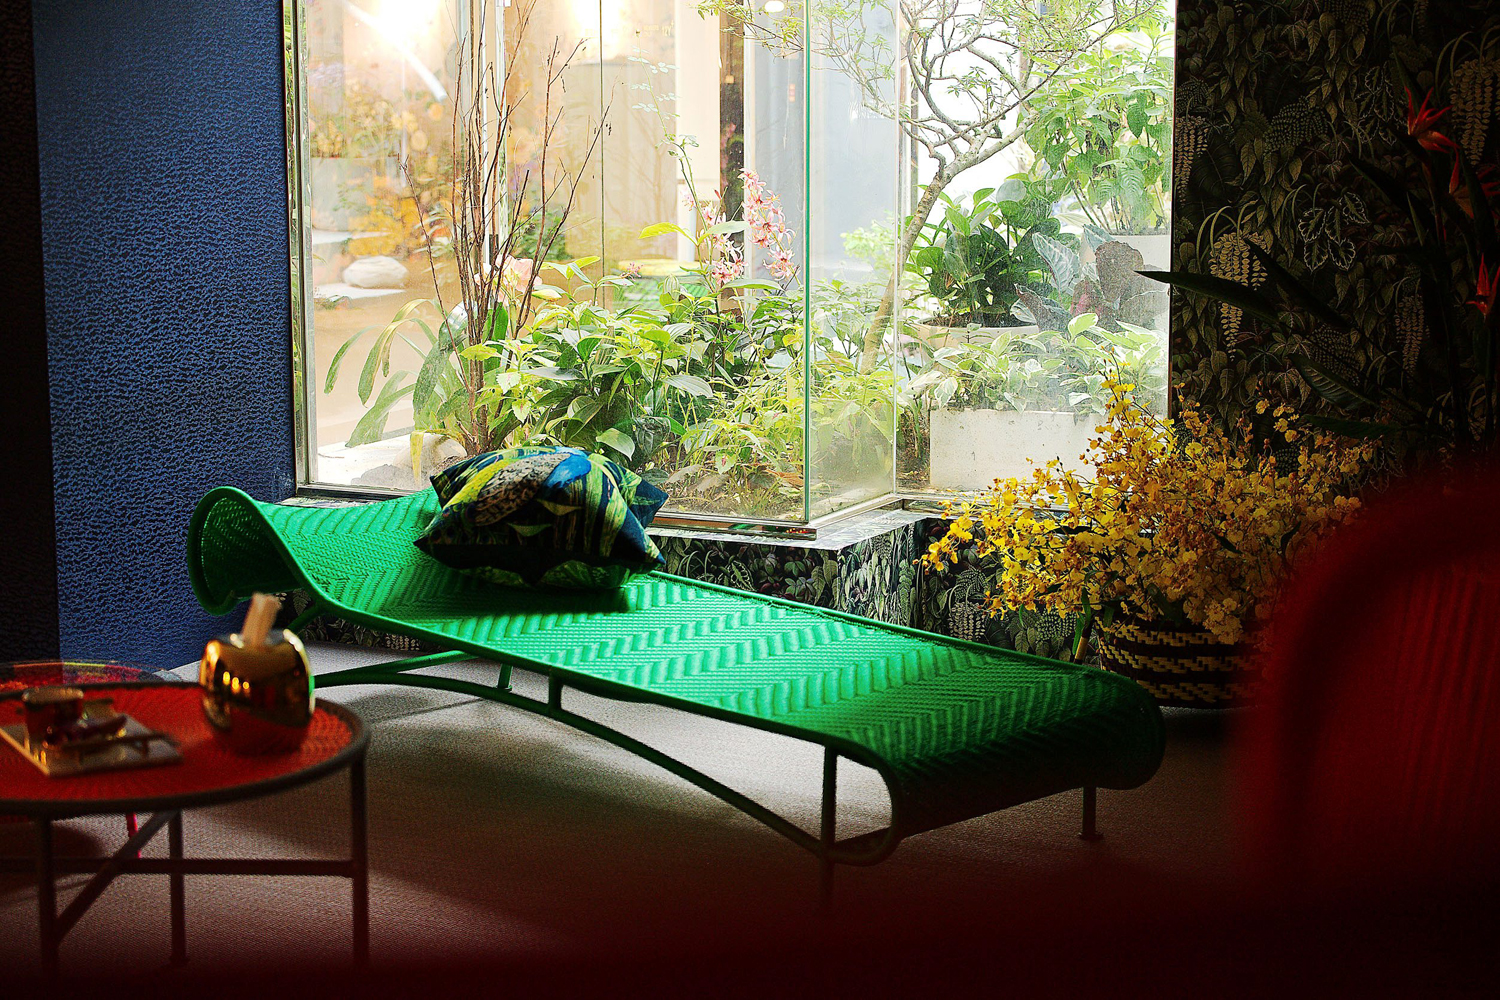 Glowed Up and New Furniture from Patricia Urquiola + Moroso